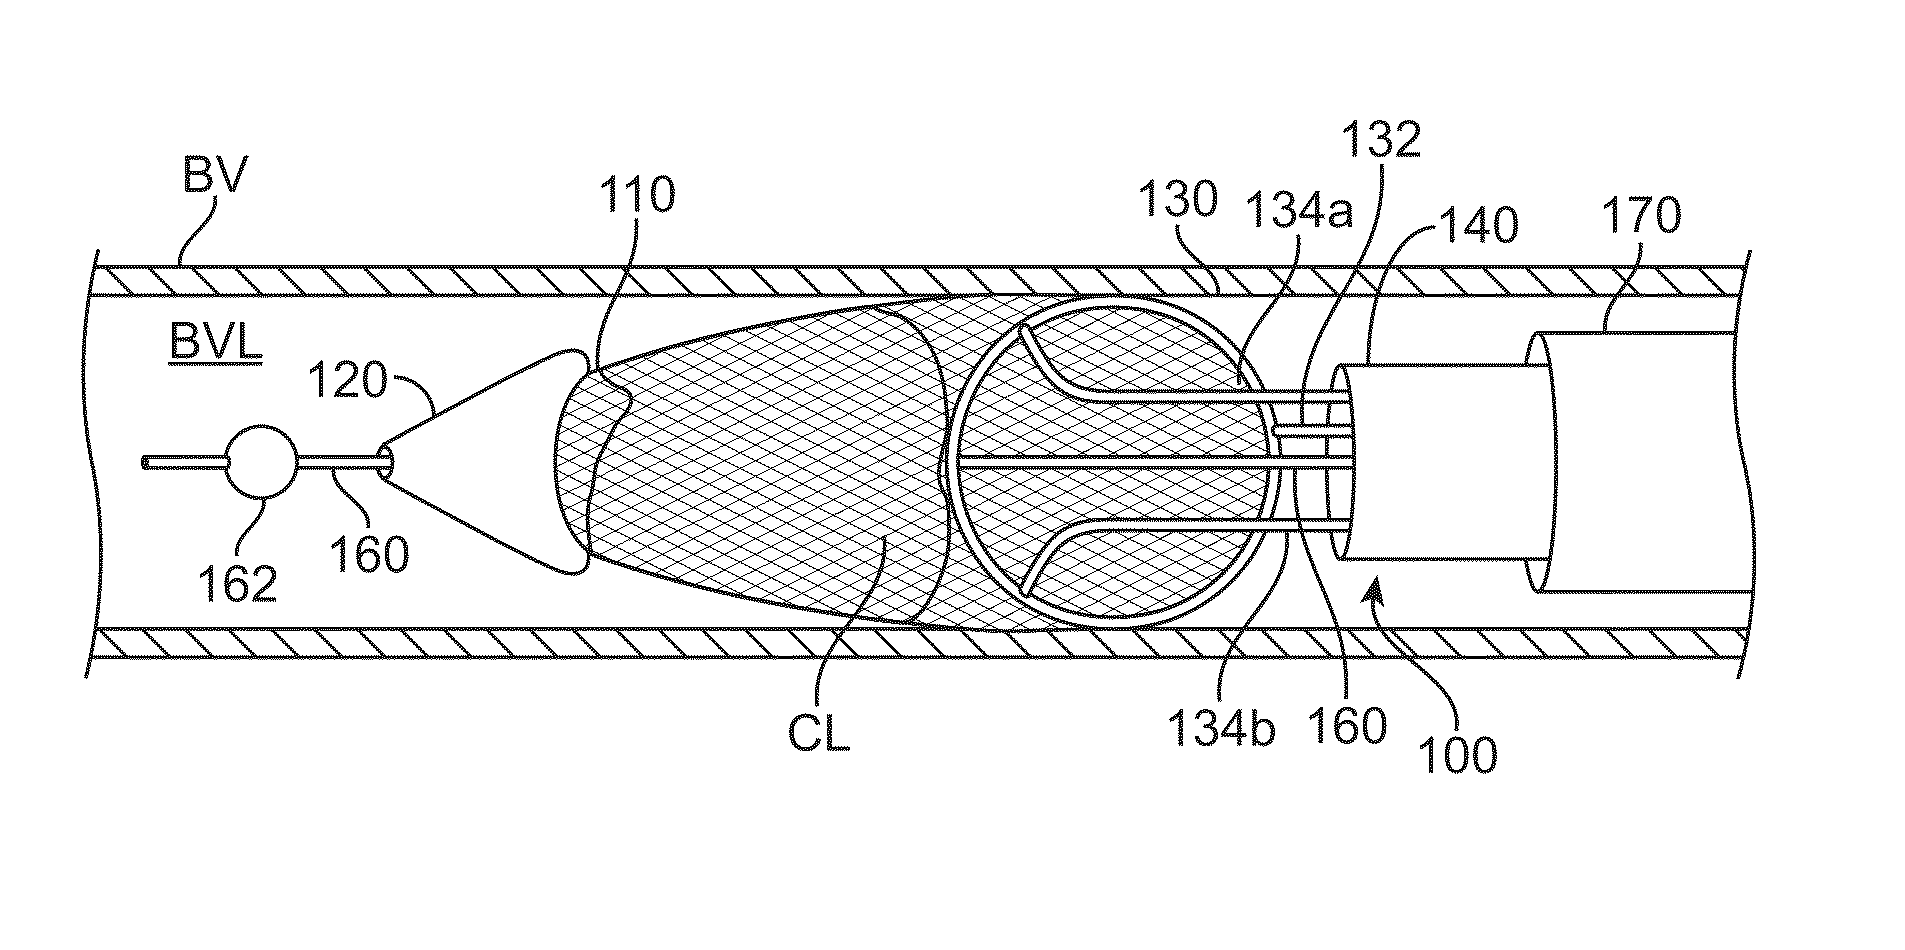 Thrombus removal and intravascular distal embolic protection device